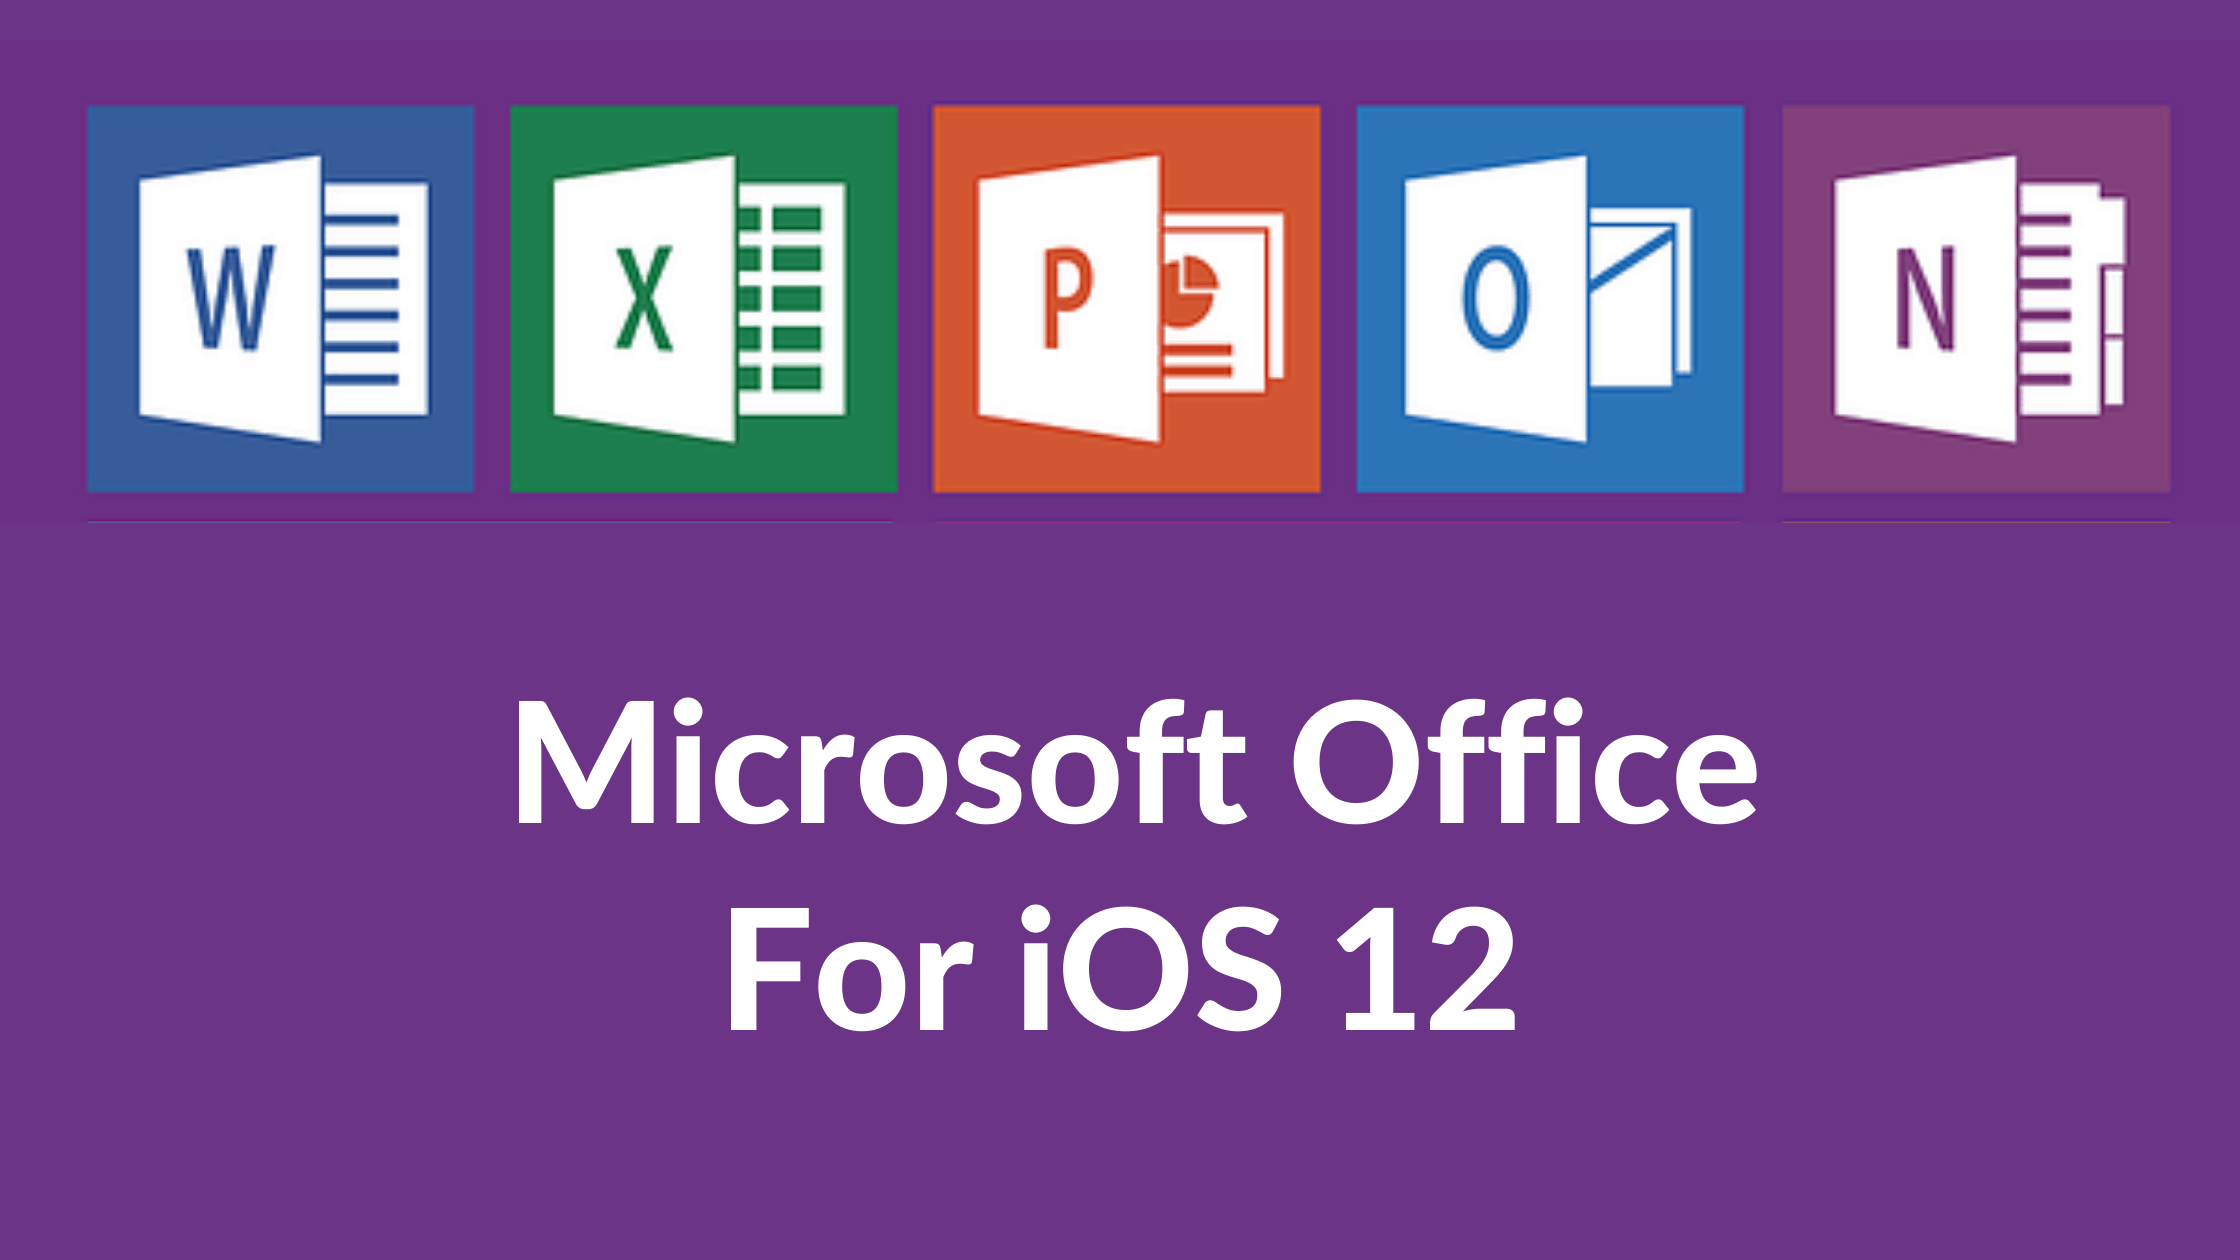 Microsoft Office for iOS 12.5.6 iPhone 5s,6, and 6 Plus